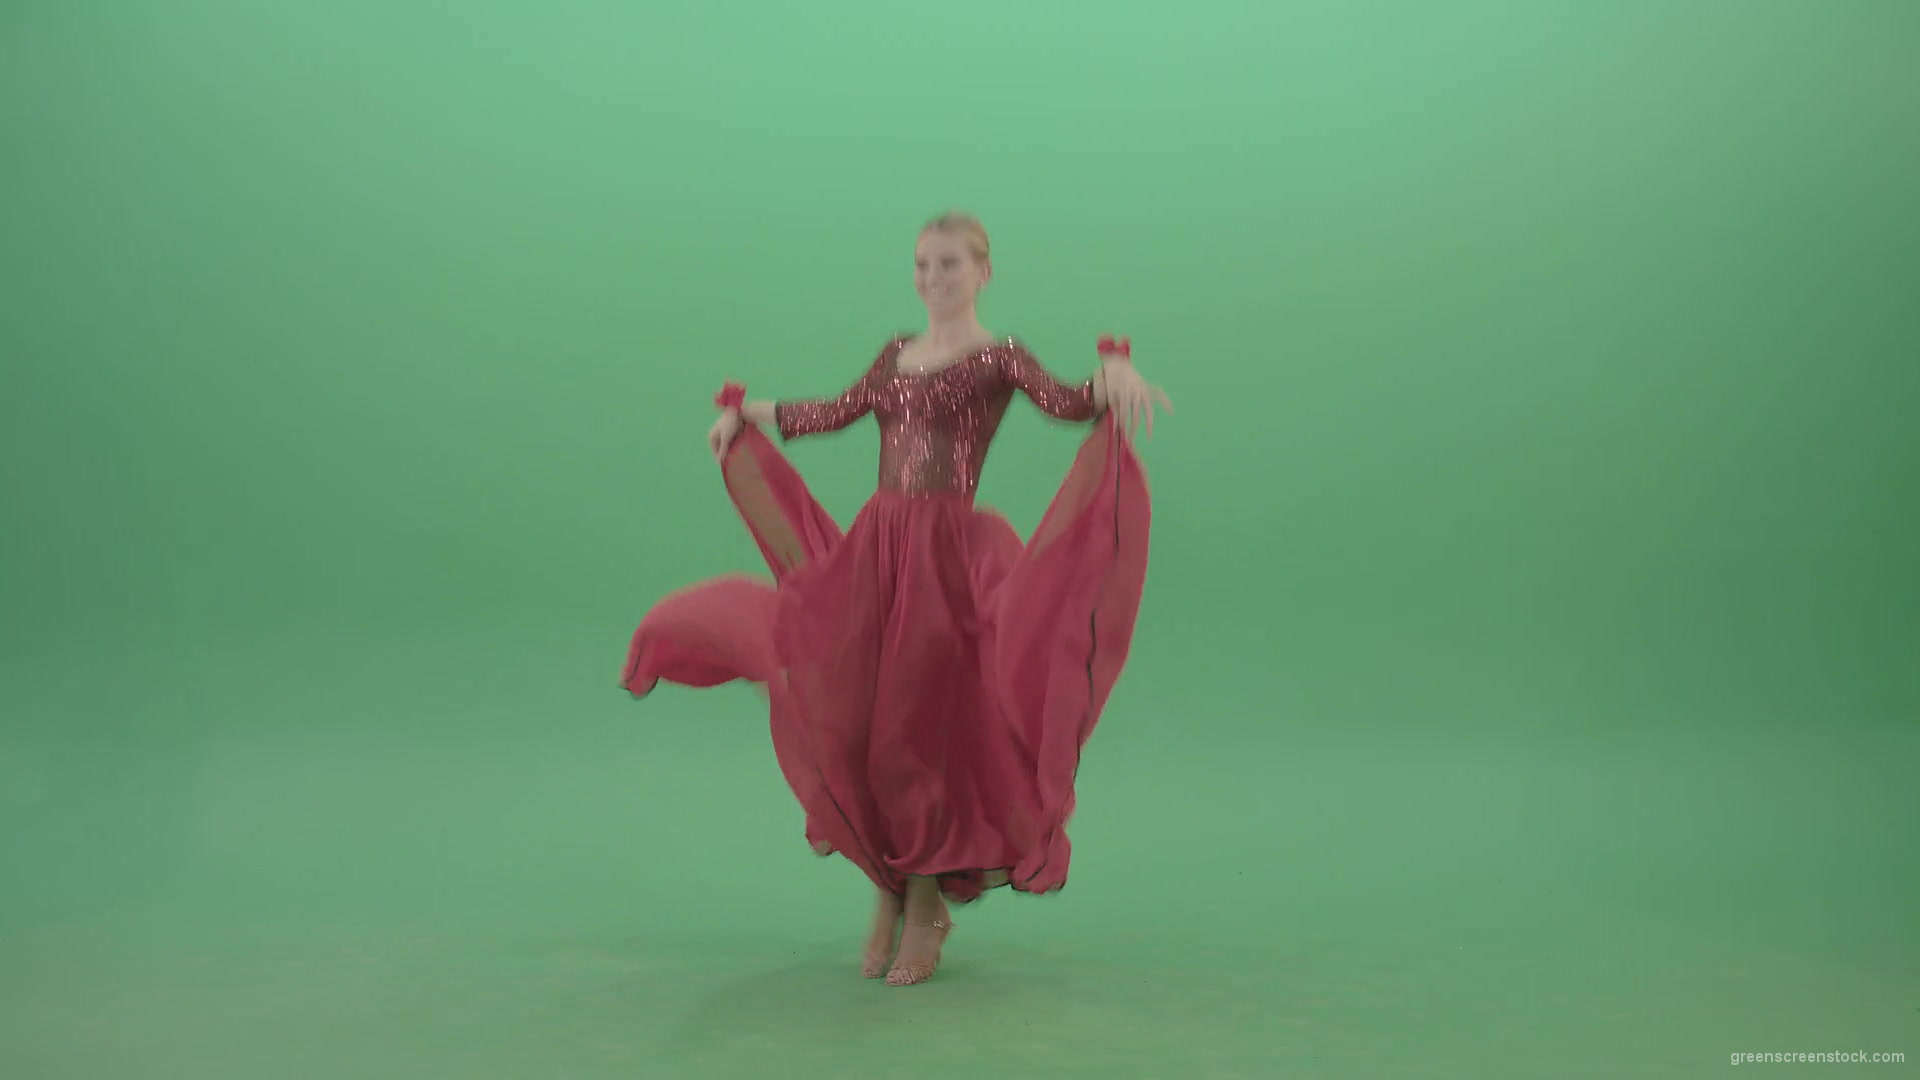 Moulin-rouge-dancing-girl-in-red-dress-jumping-on-green-screen-4K-Video-Footage-1920_007 Green Screen Stock